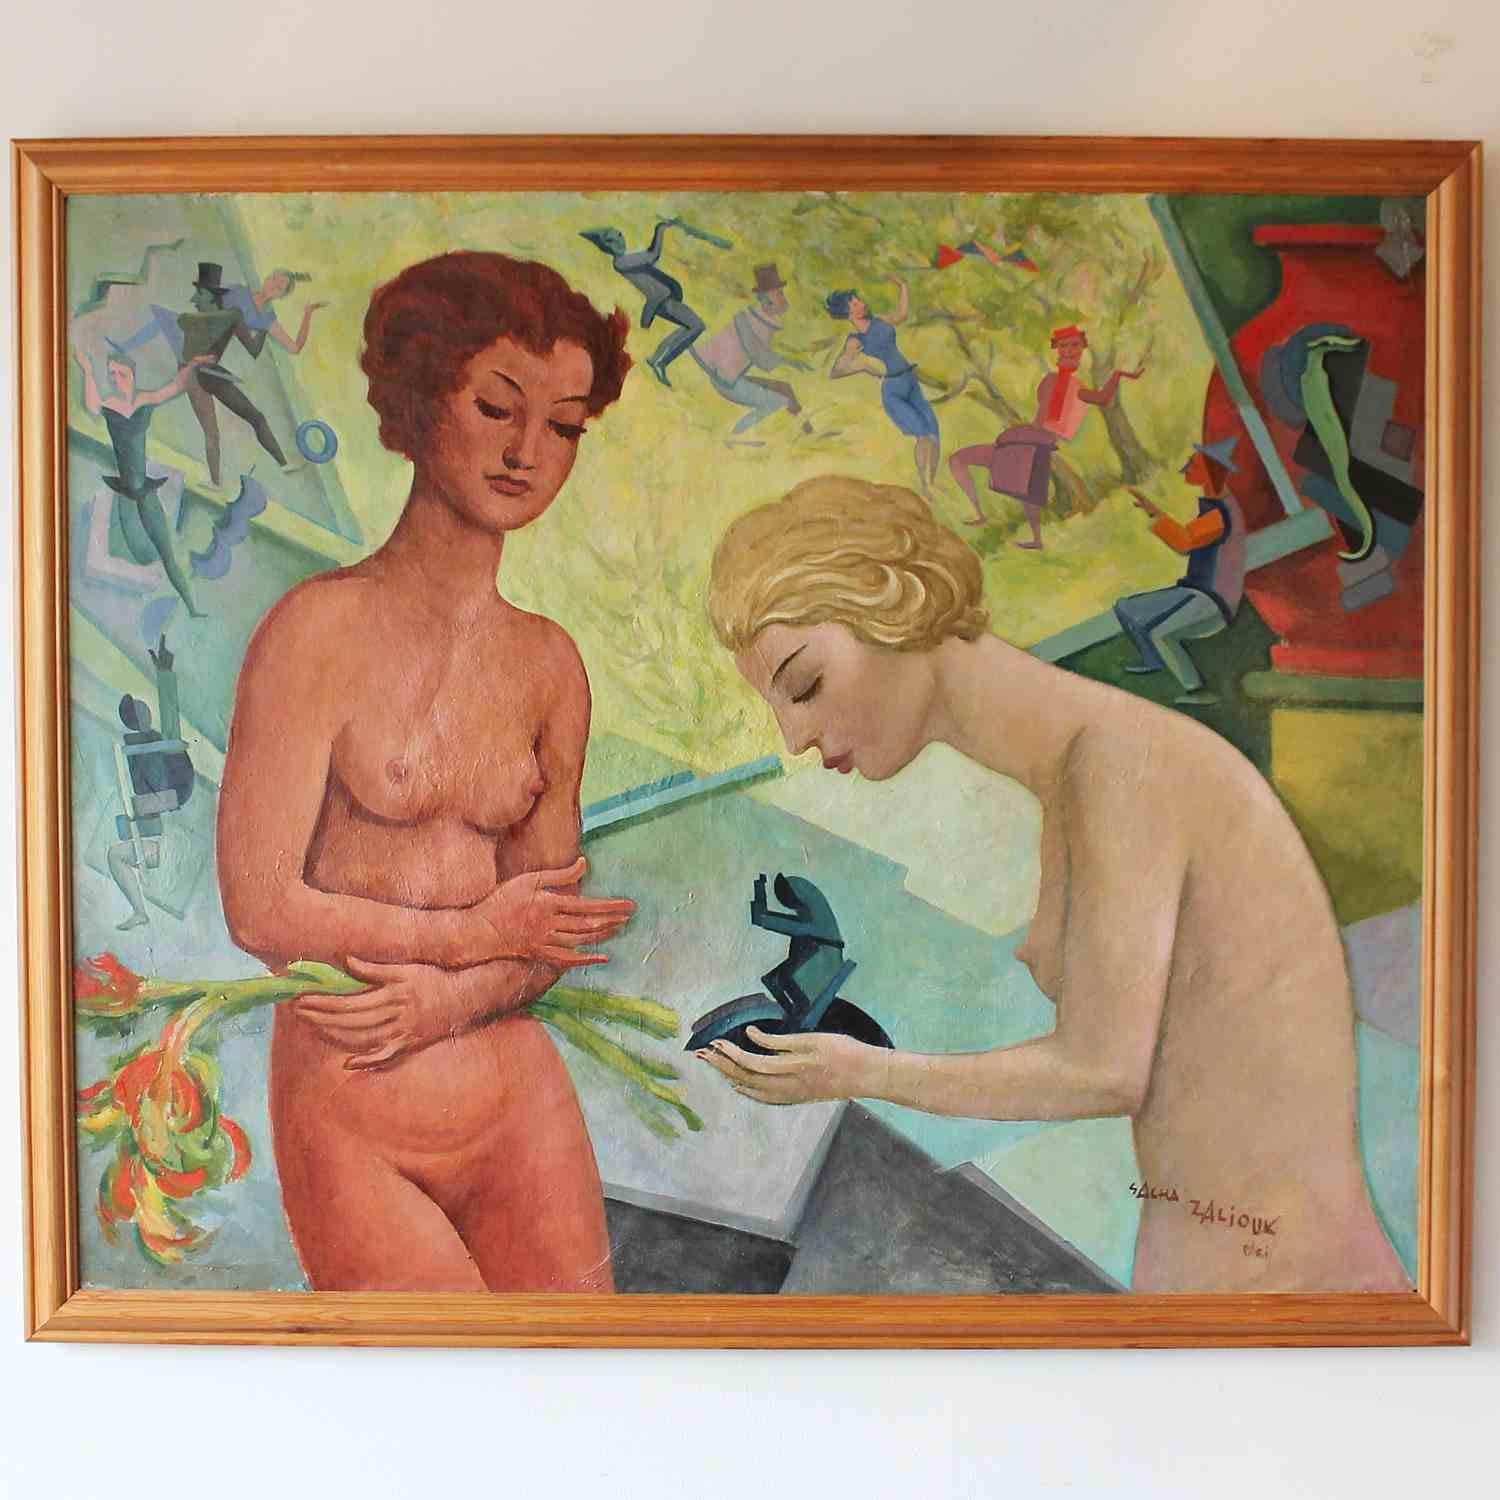 Reverence, an oil on canvas painting by Sacha Zaliouk (1887-1971). Zaliouk was a Russian born artist who became a French citizen by working his way up through the French Army. He painted many famous models, including Kiki de Montparnasse and